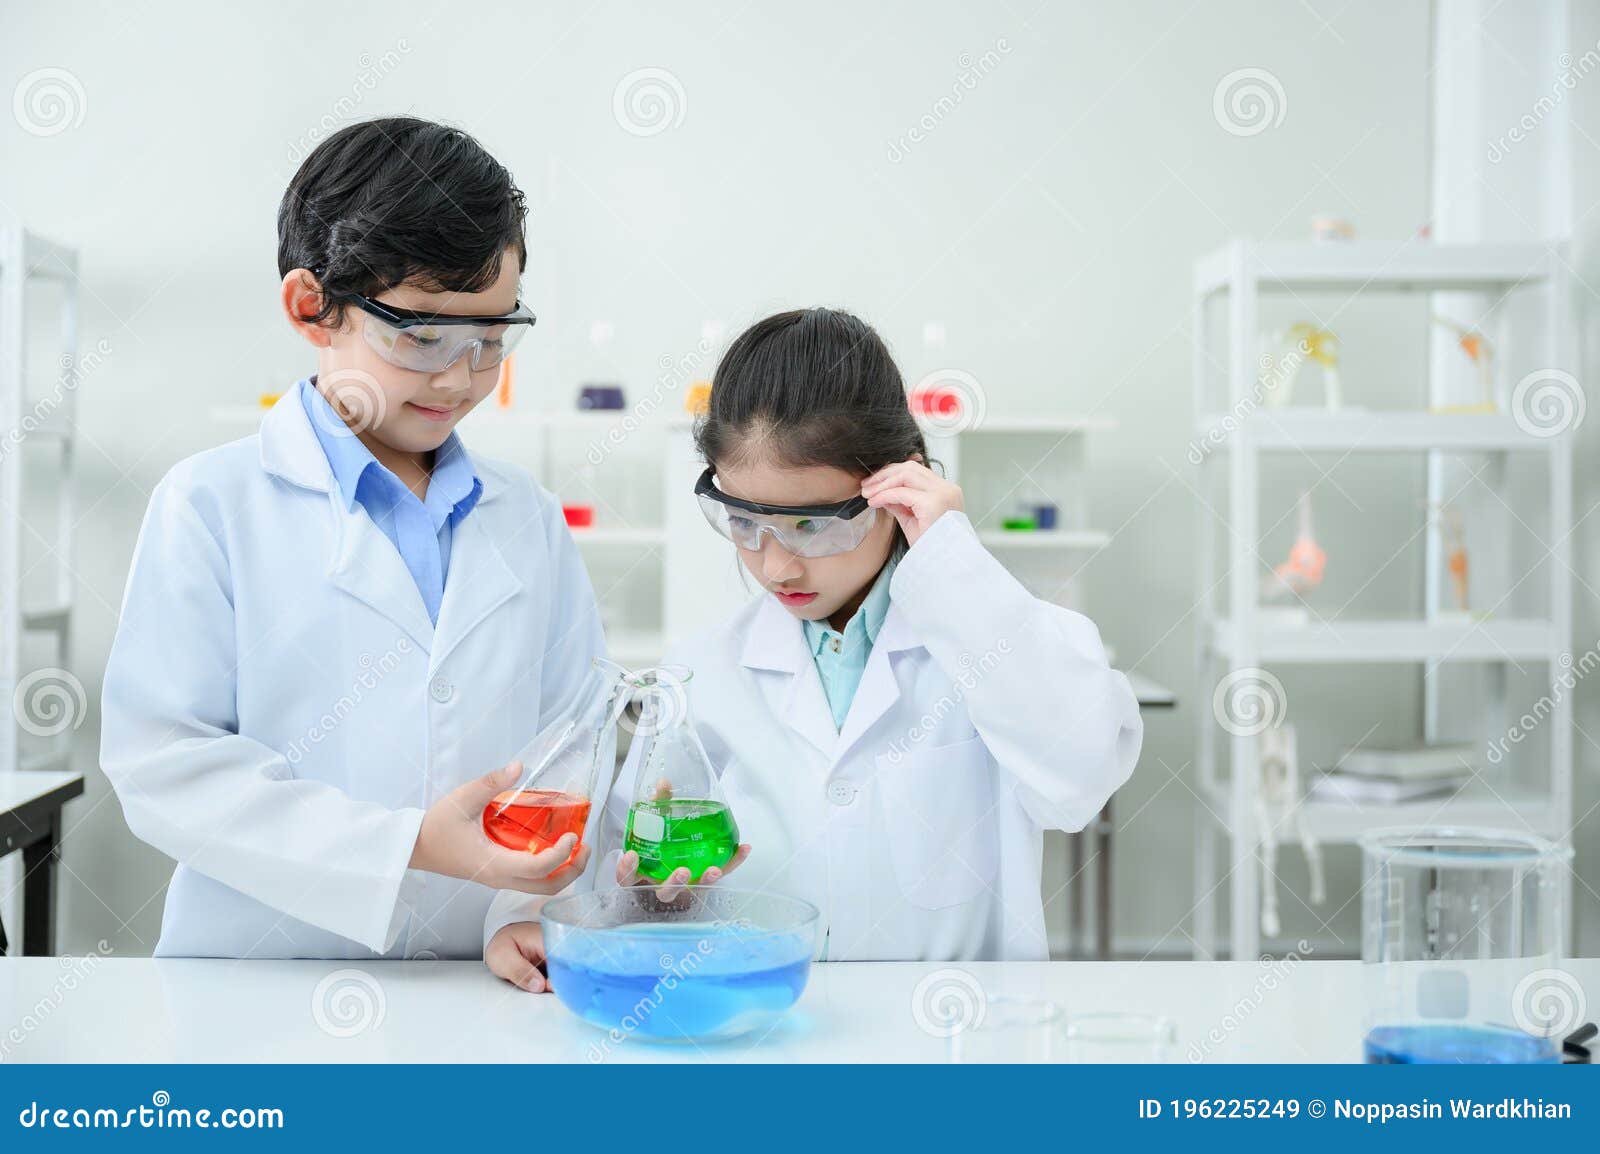 Little Scientists Adding Color Dye into Beakers Stock Image - Image of ...